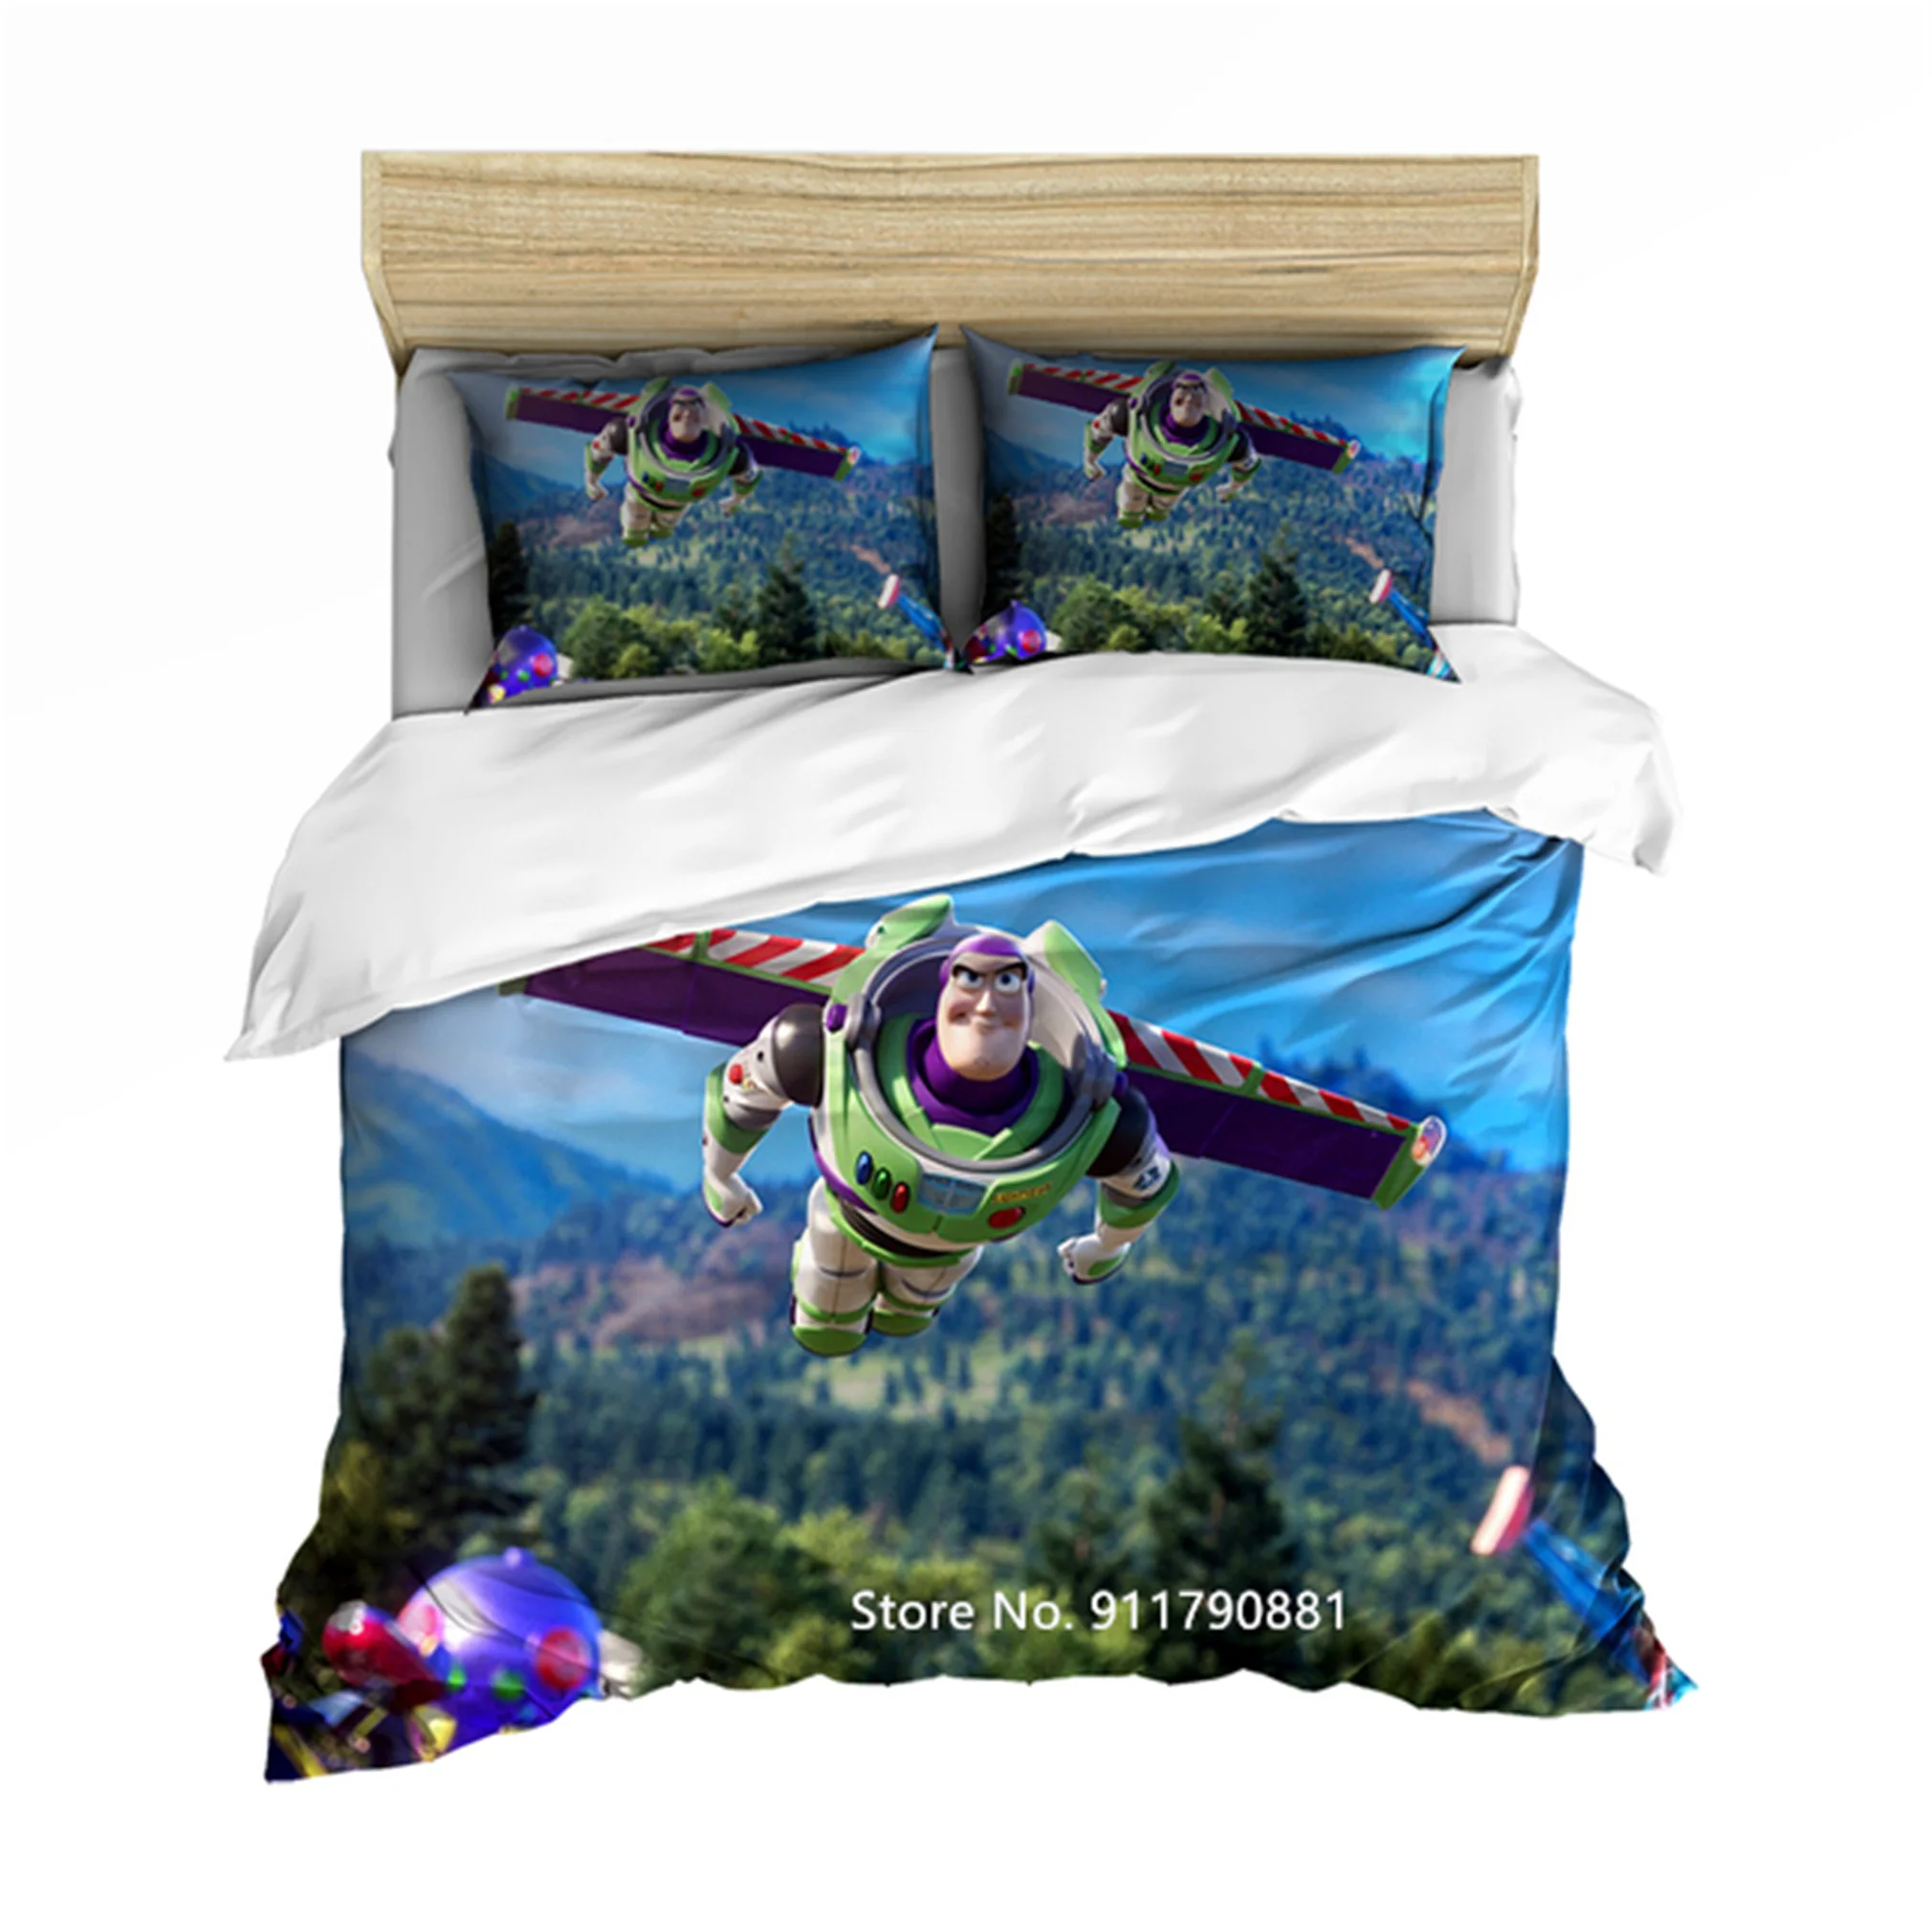 

Disney Toy Story Bedding Set Woody Buzz Lightyear Down Duvet Quilt Cover Pillowcase Comic Bedroom Decoration Home Textile